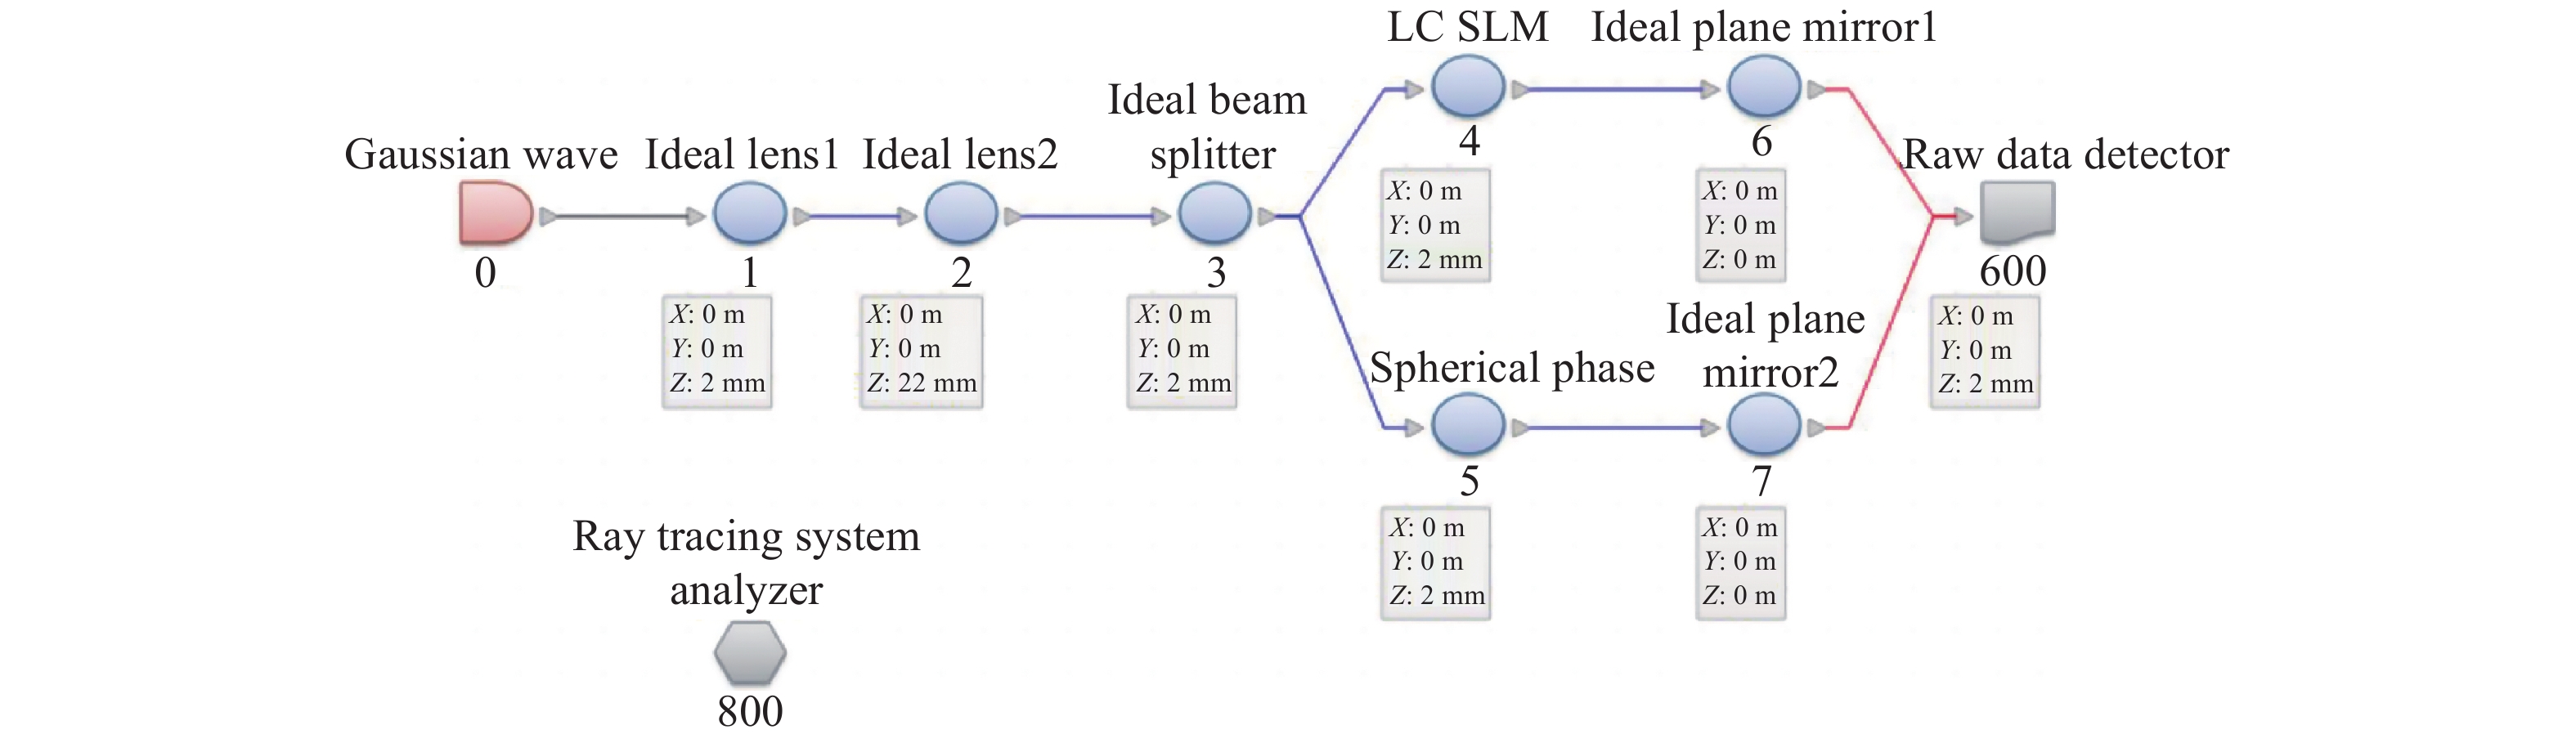 Simulation flow chart of measuring micro-displacement based on the theory of vortex beams and spherical wave interference